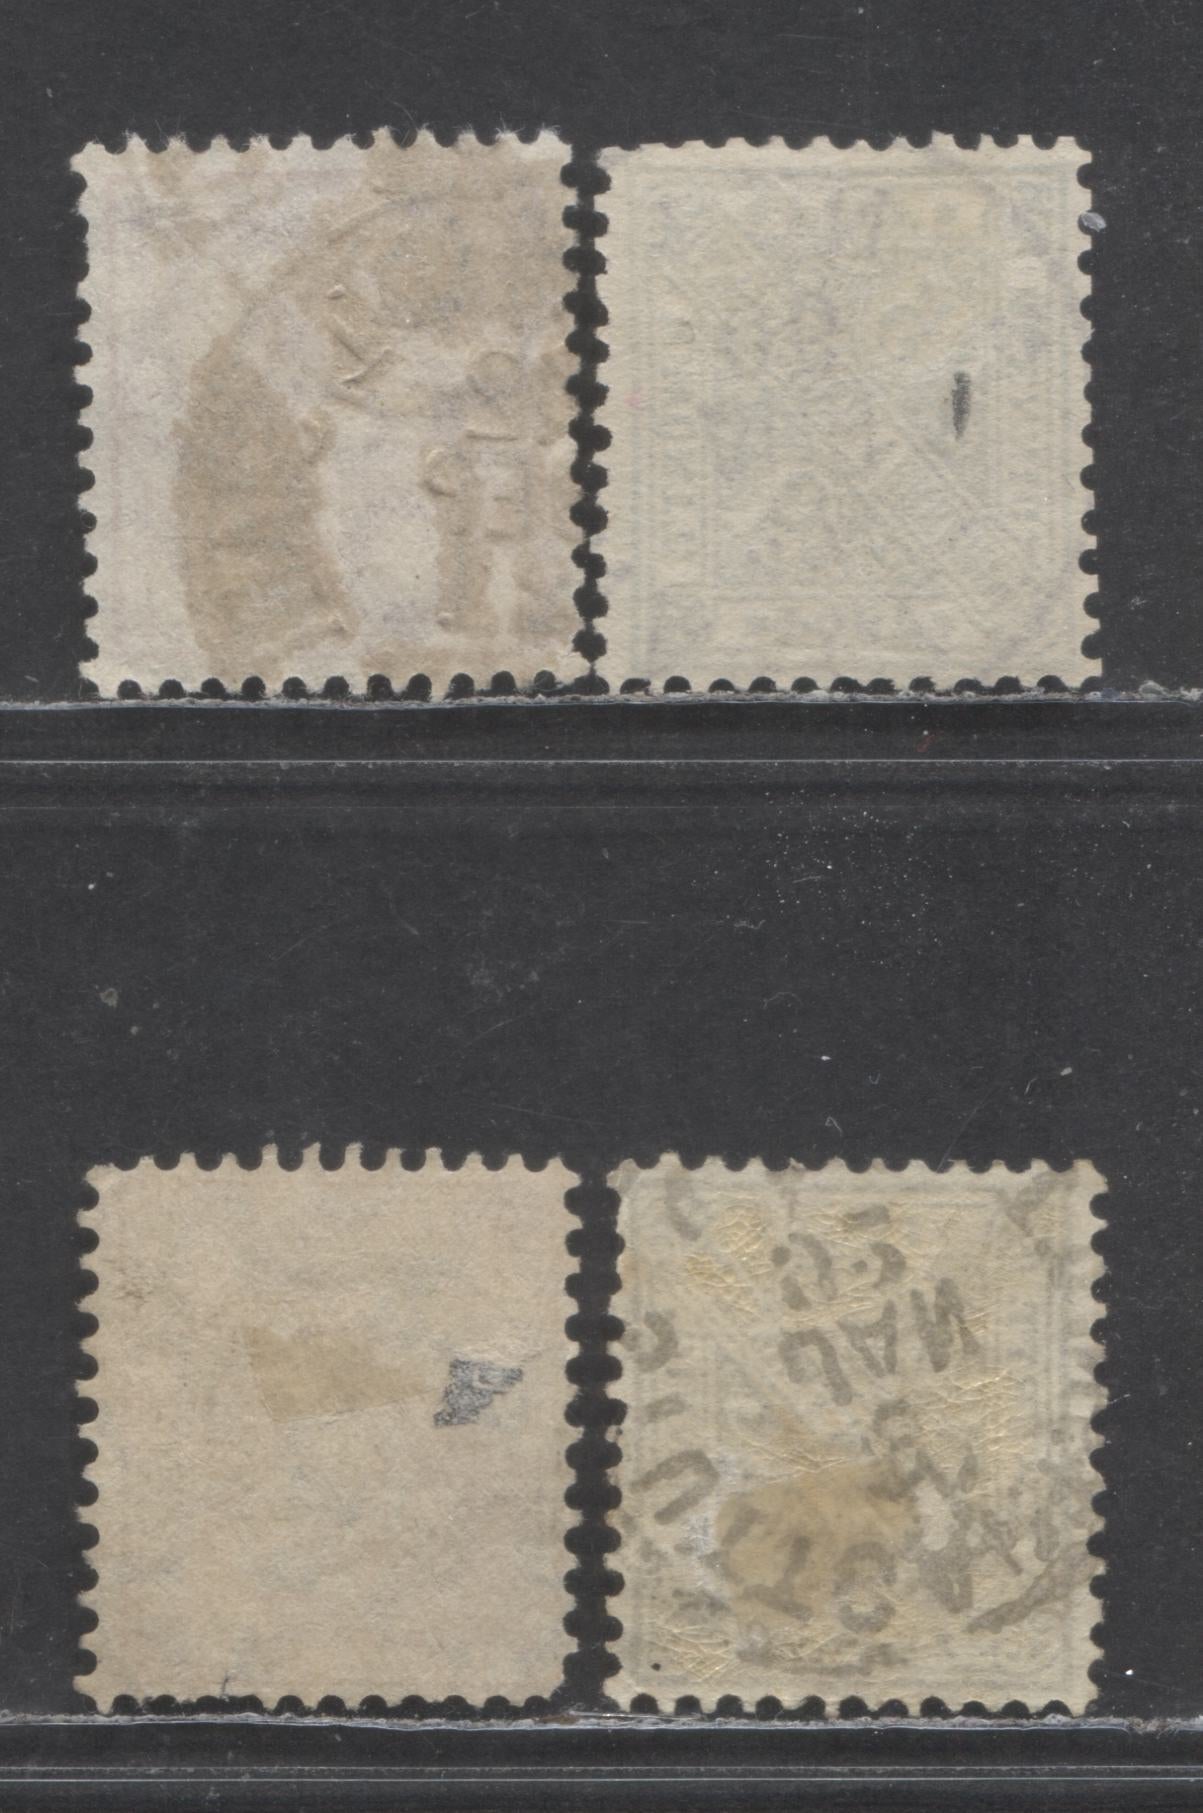 Lot 68 Germany - Wurttemberg Mi#153 (O26)/232 (SC# O128) 1890-1921 Official Issues, Postal Cancels, 4 Very Fine Used Singles, Click on Listing to See ALL Pictures, Estimated Value $30